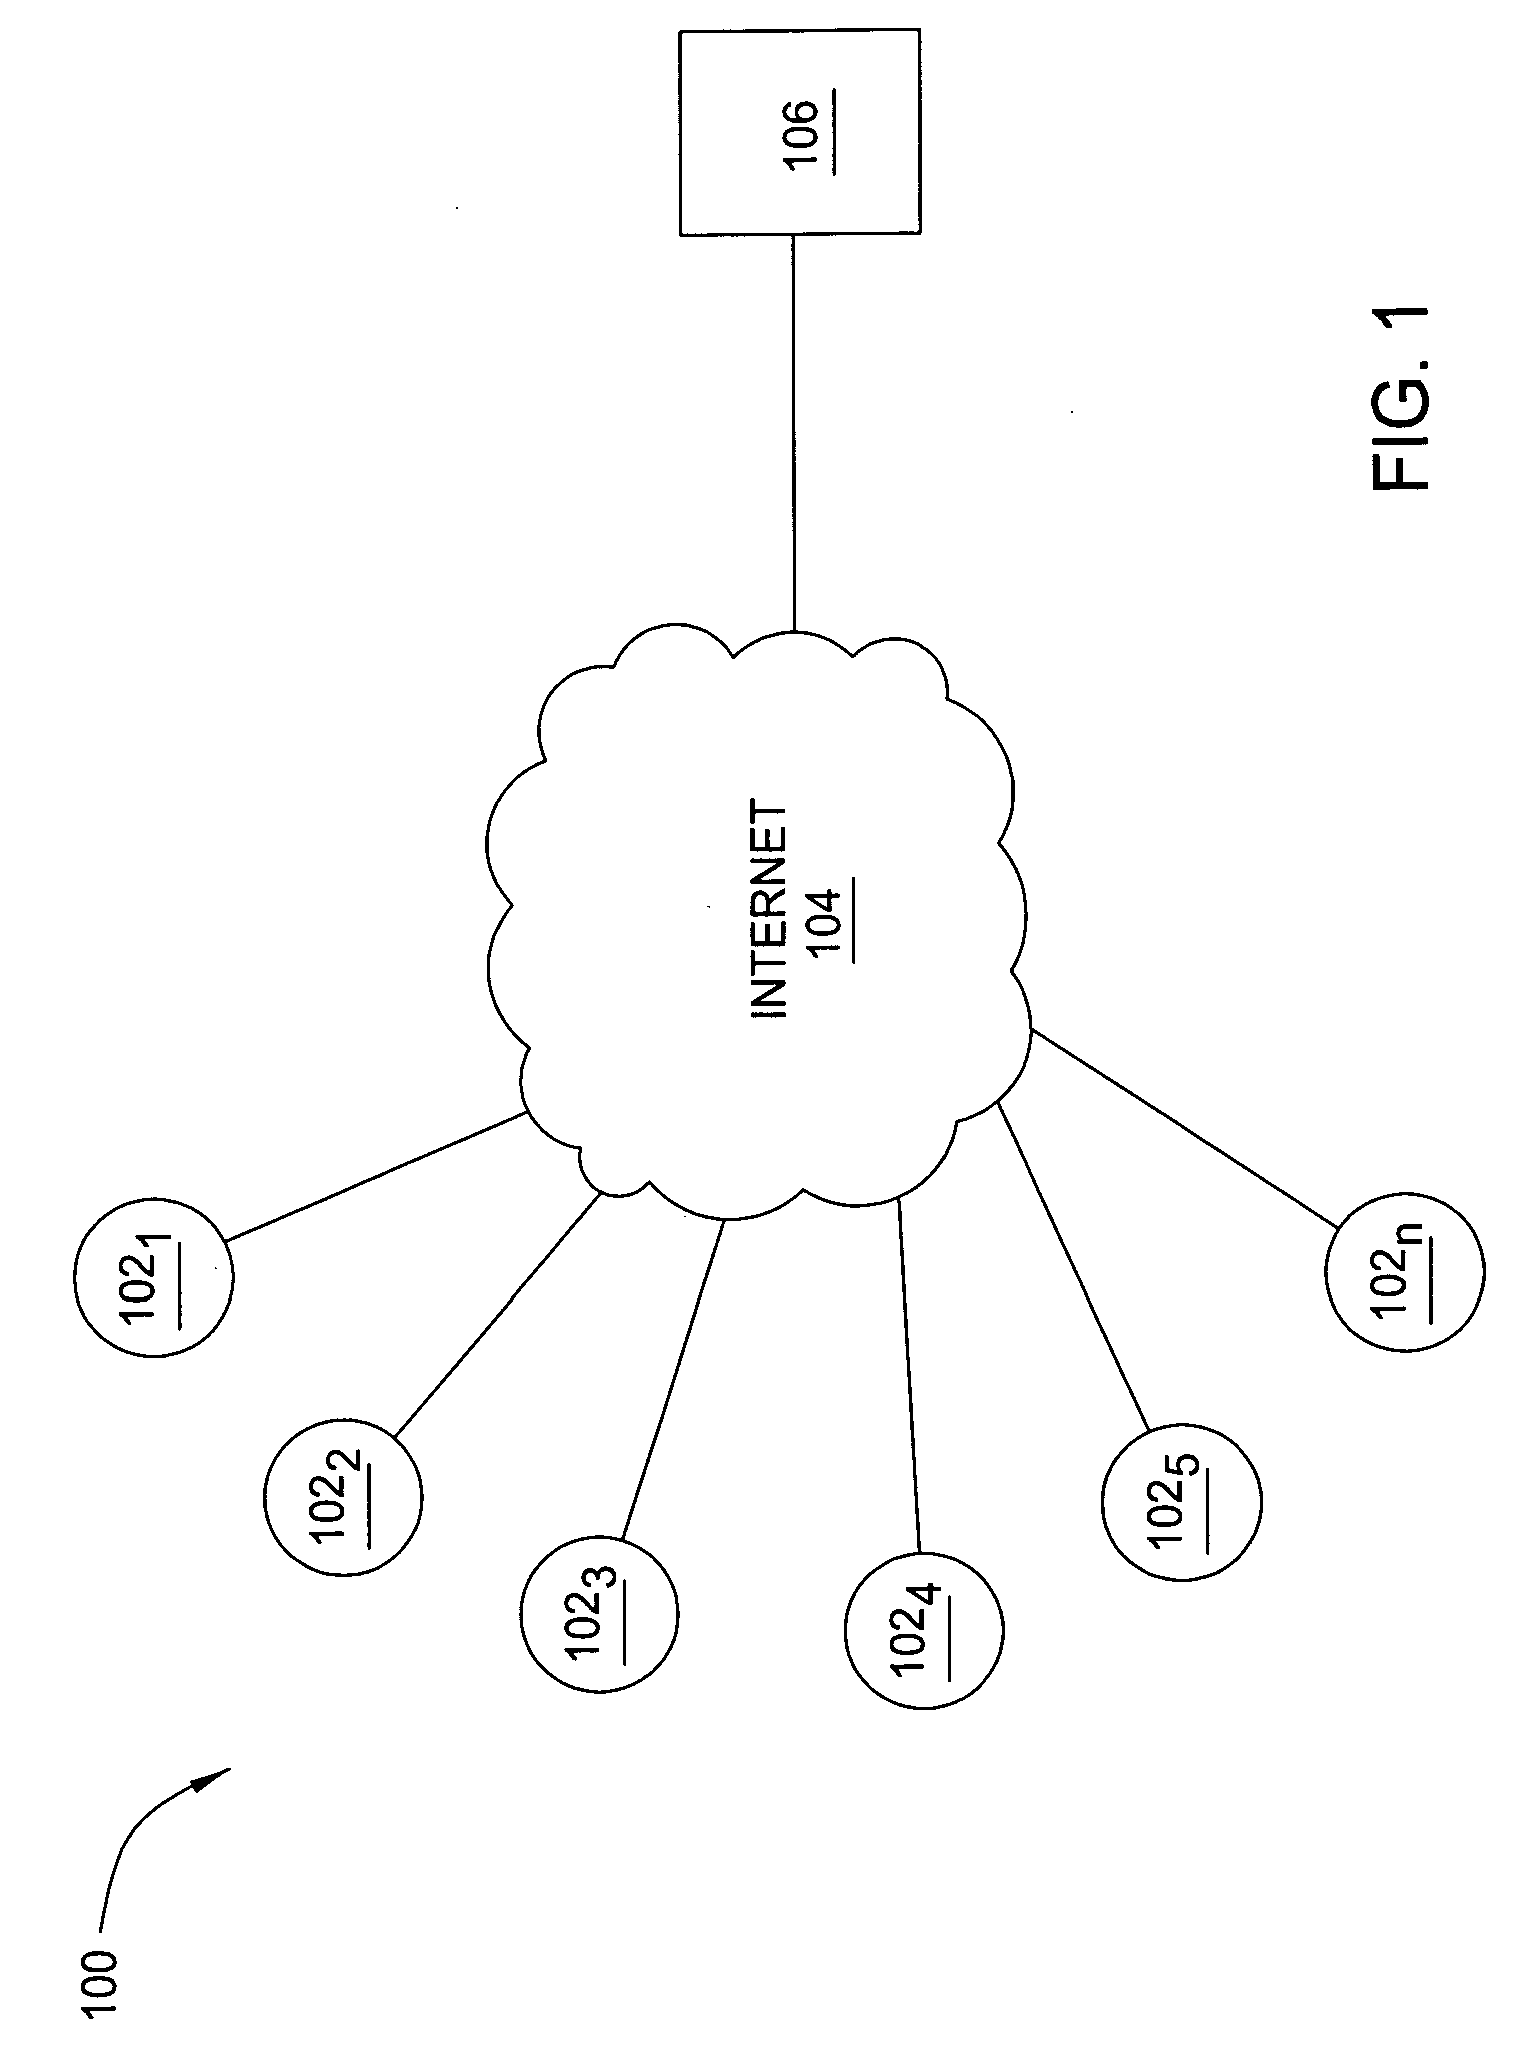 Method and apparatus for determining client-perceived server response time